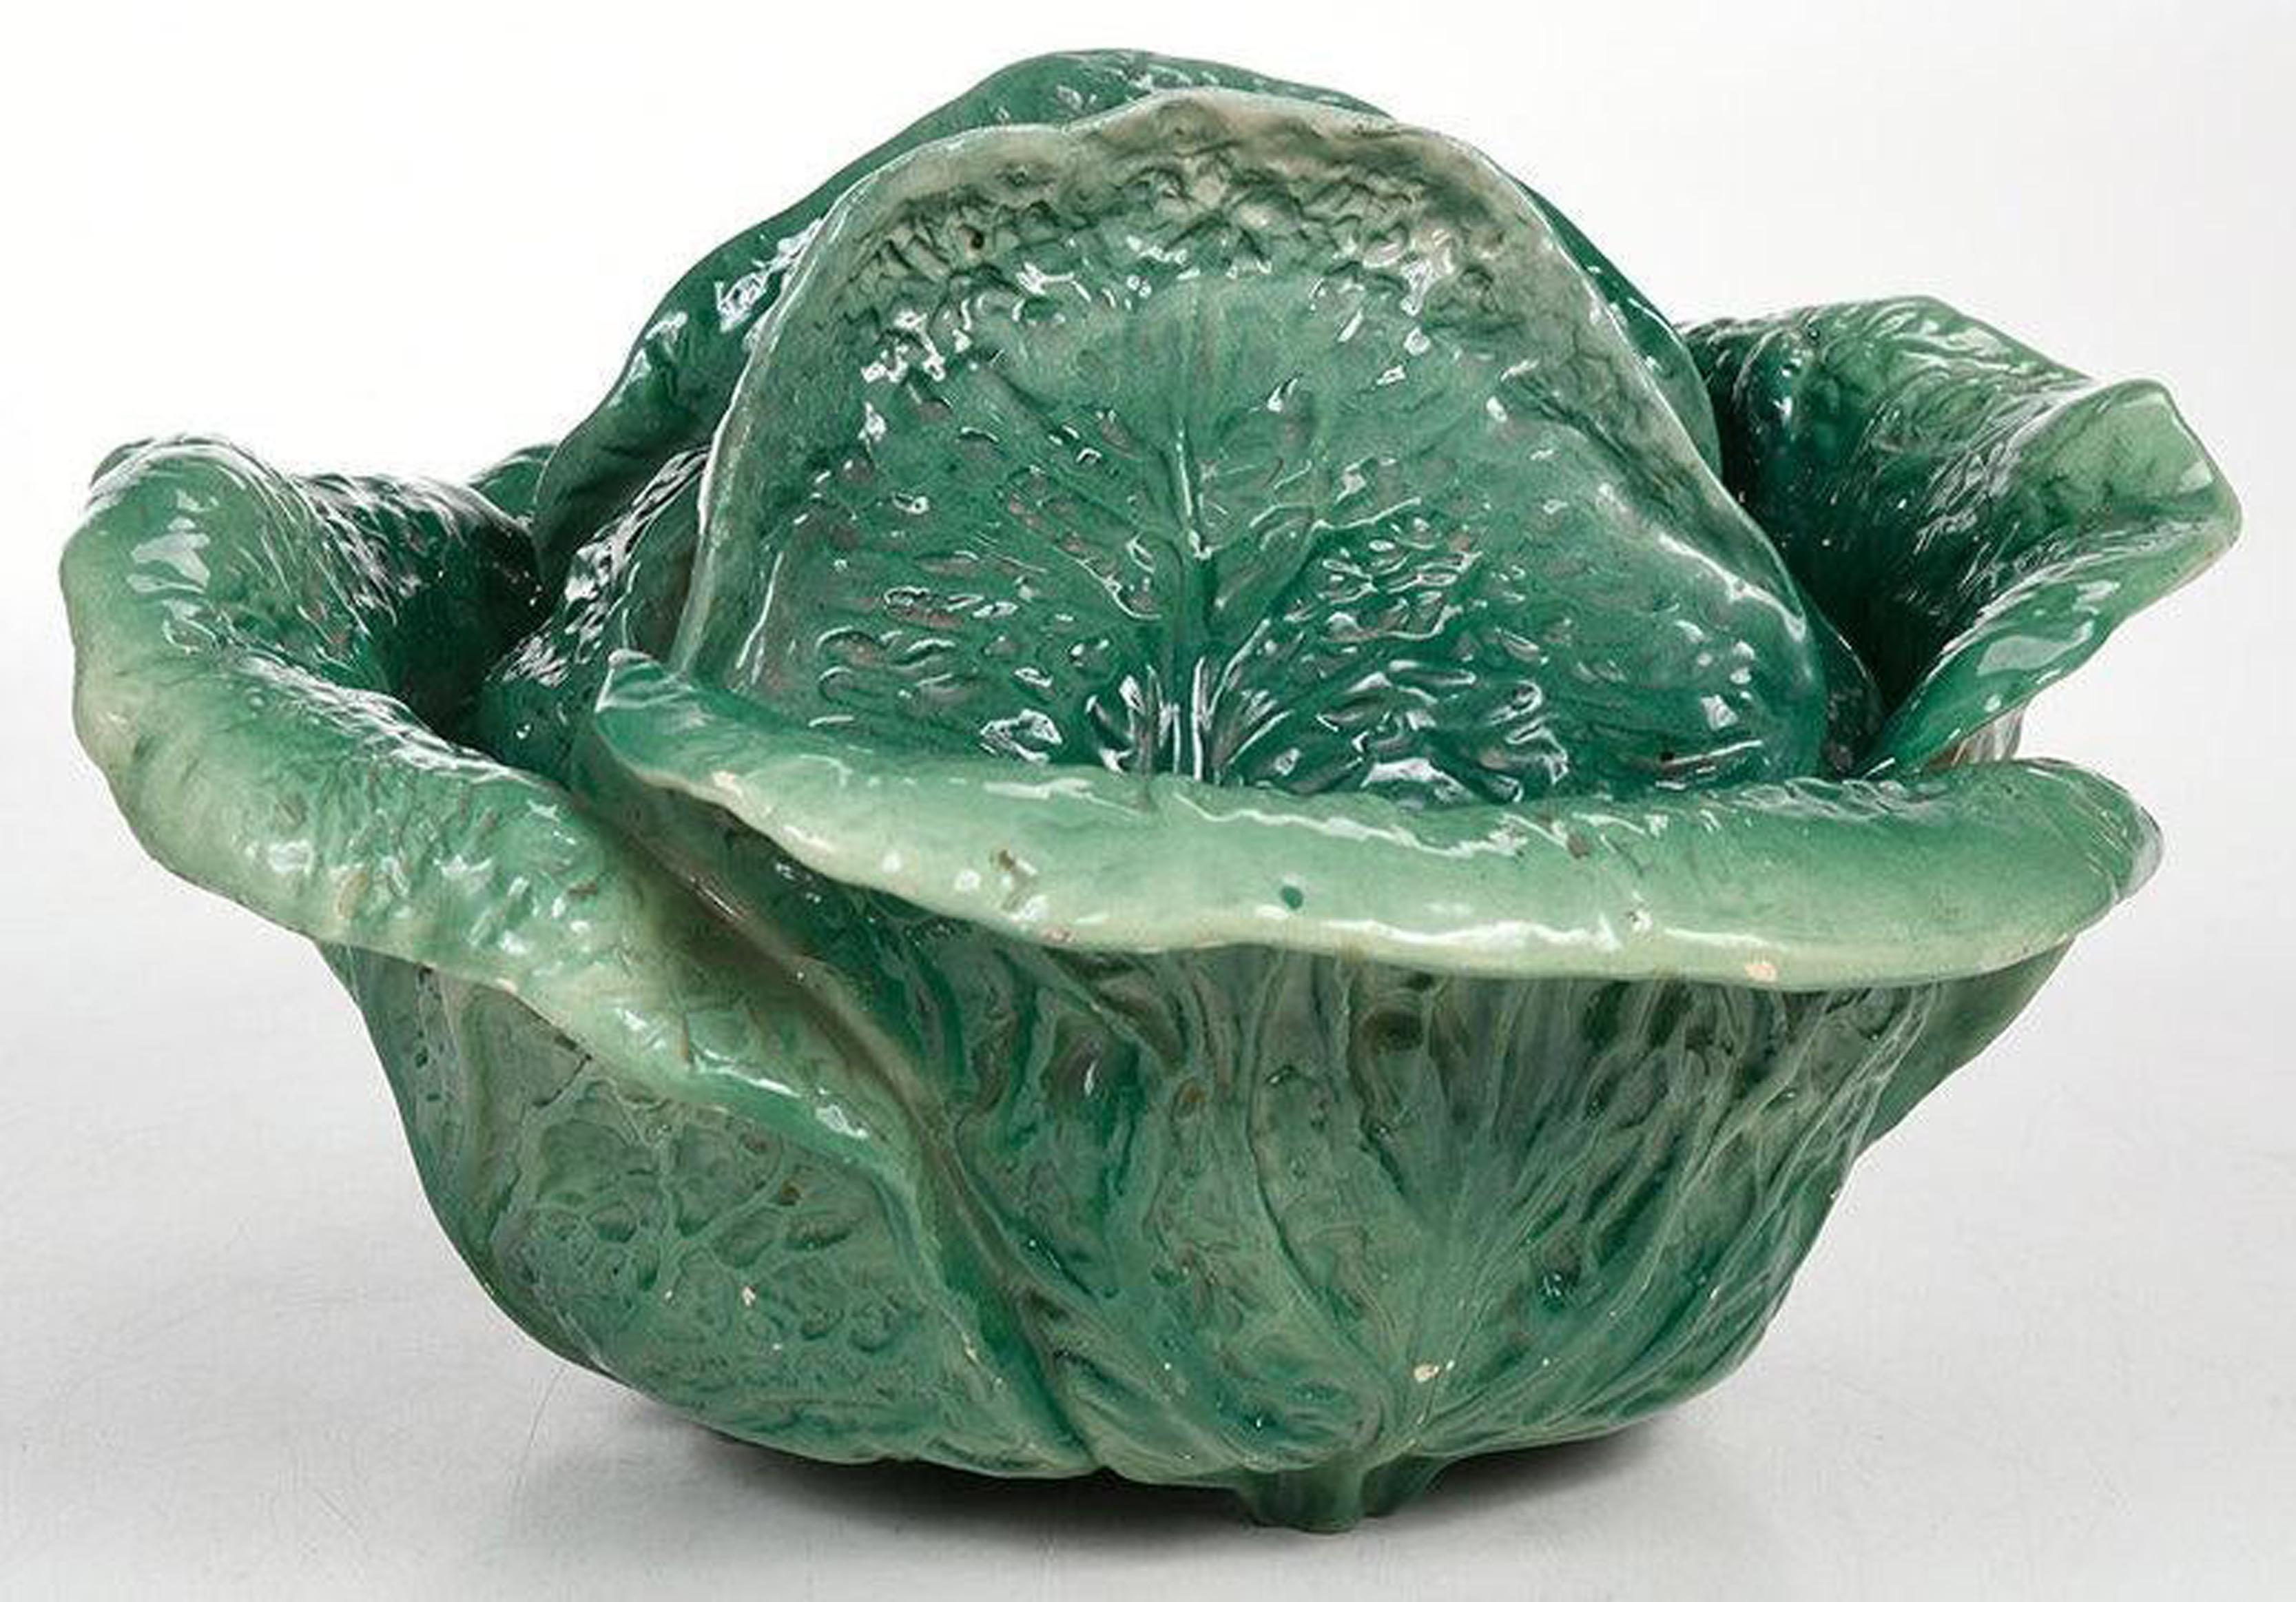 French Pottery Tromp L'oeil creamware cabbage tureen and cover,
18th century


A French tromp l'oeil creamware tureen and cover naturalistically modeled in the form of a cabbage in shades of green. 

Dimensions: 7 inches high x 13 inches